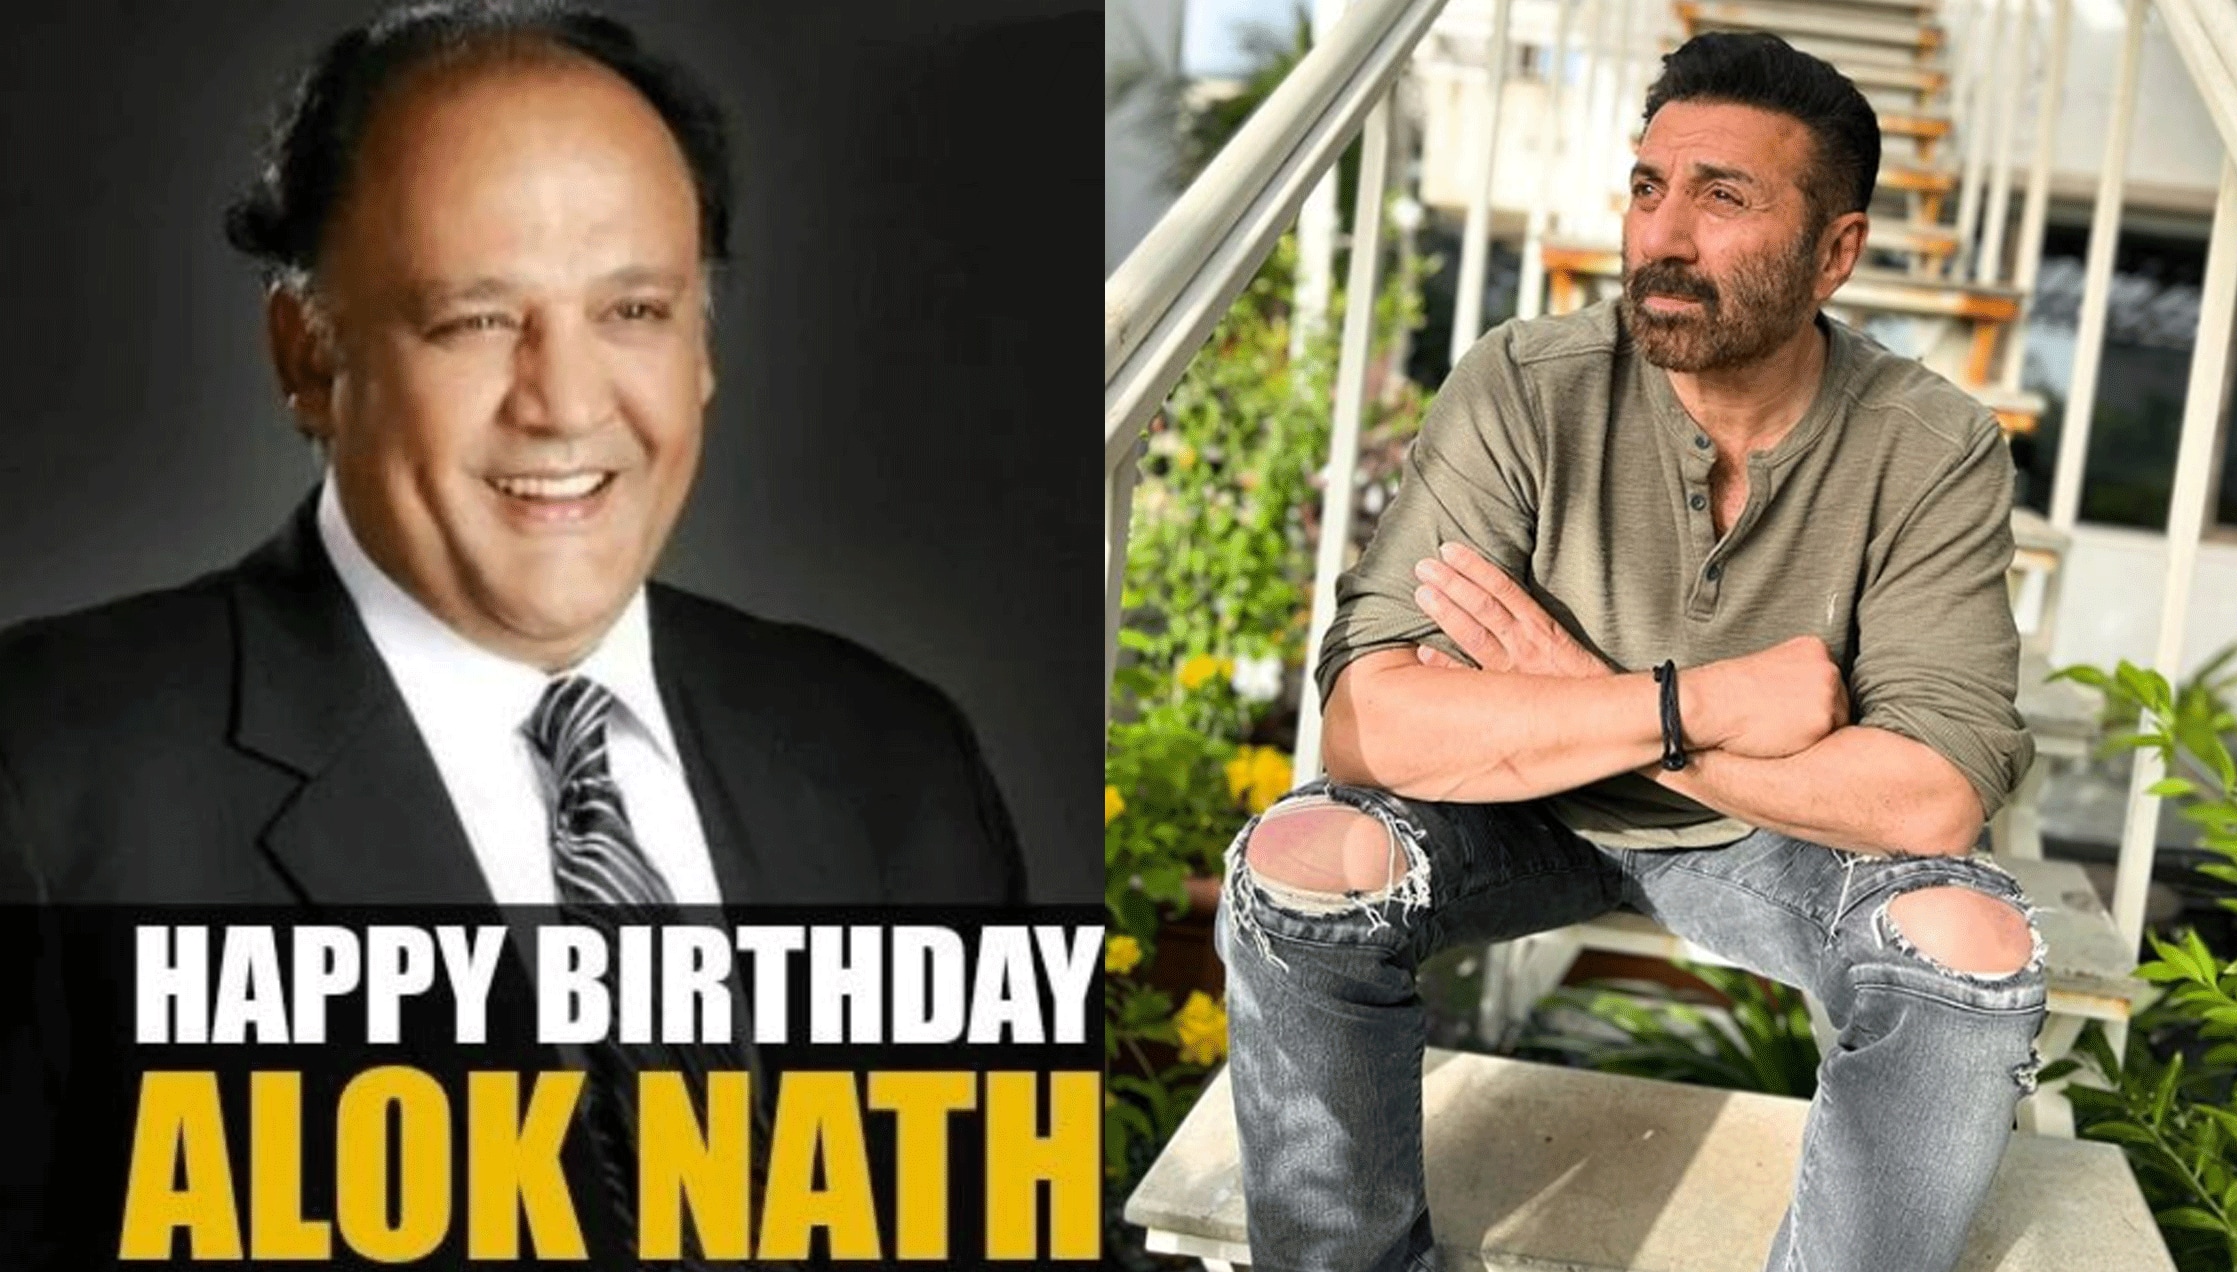 Alok Nath and Sunny Deol